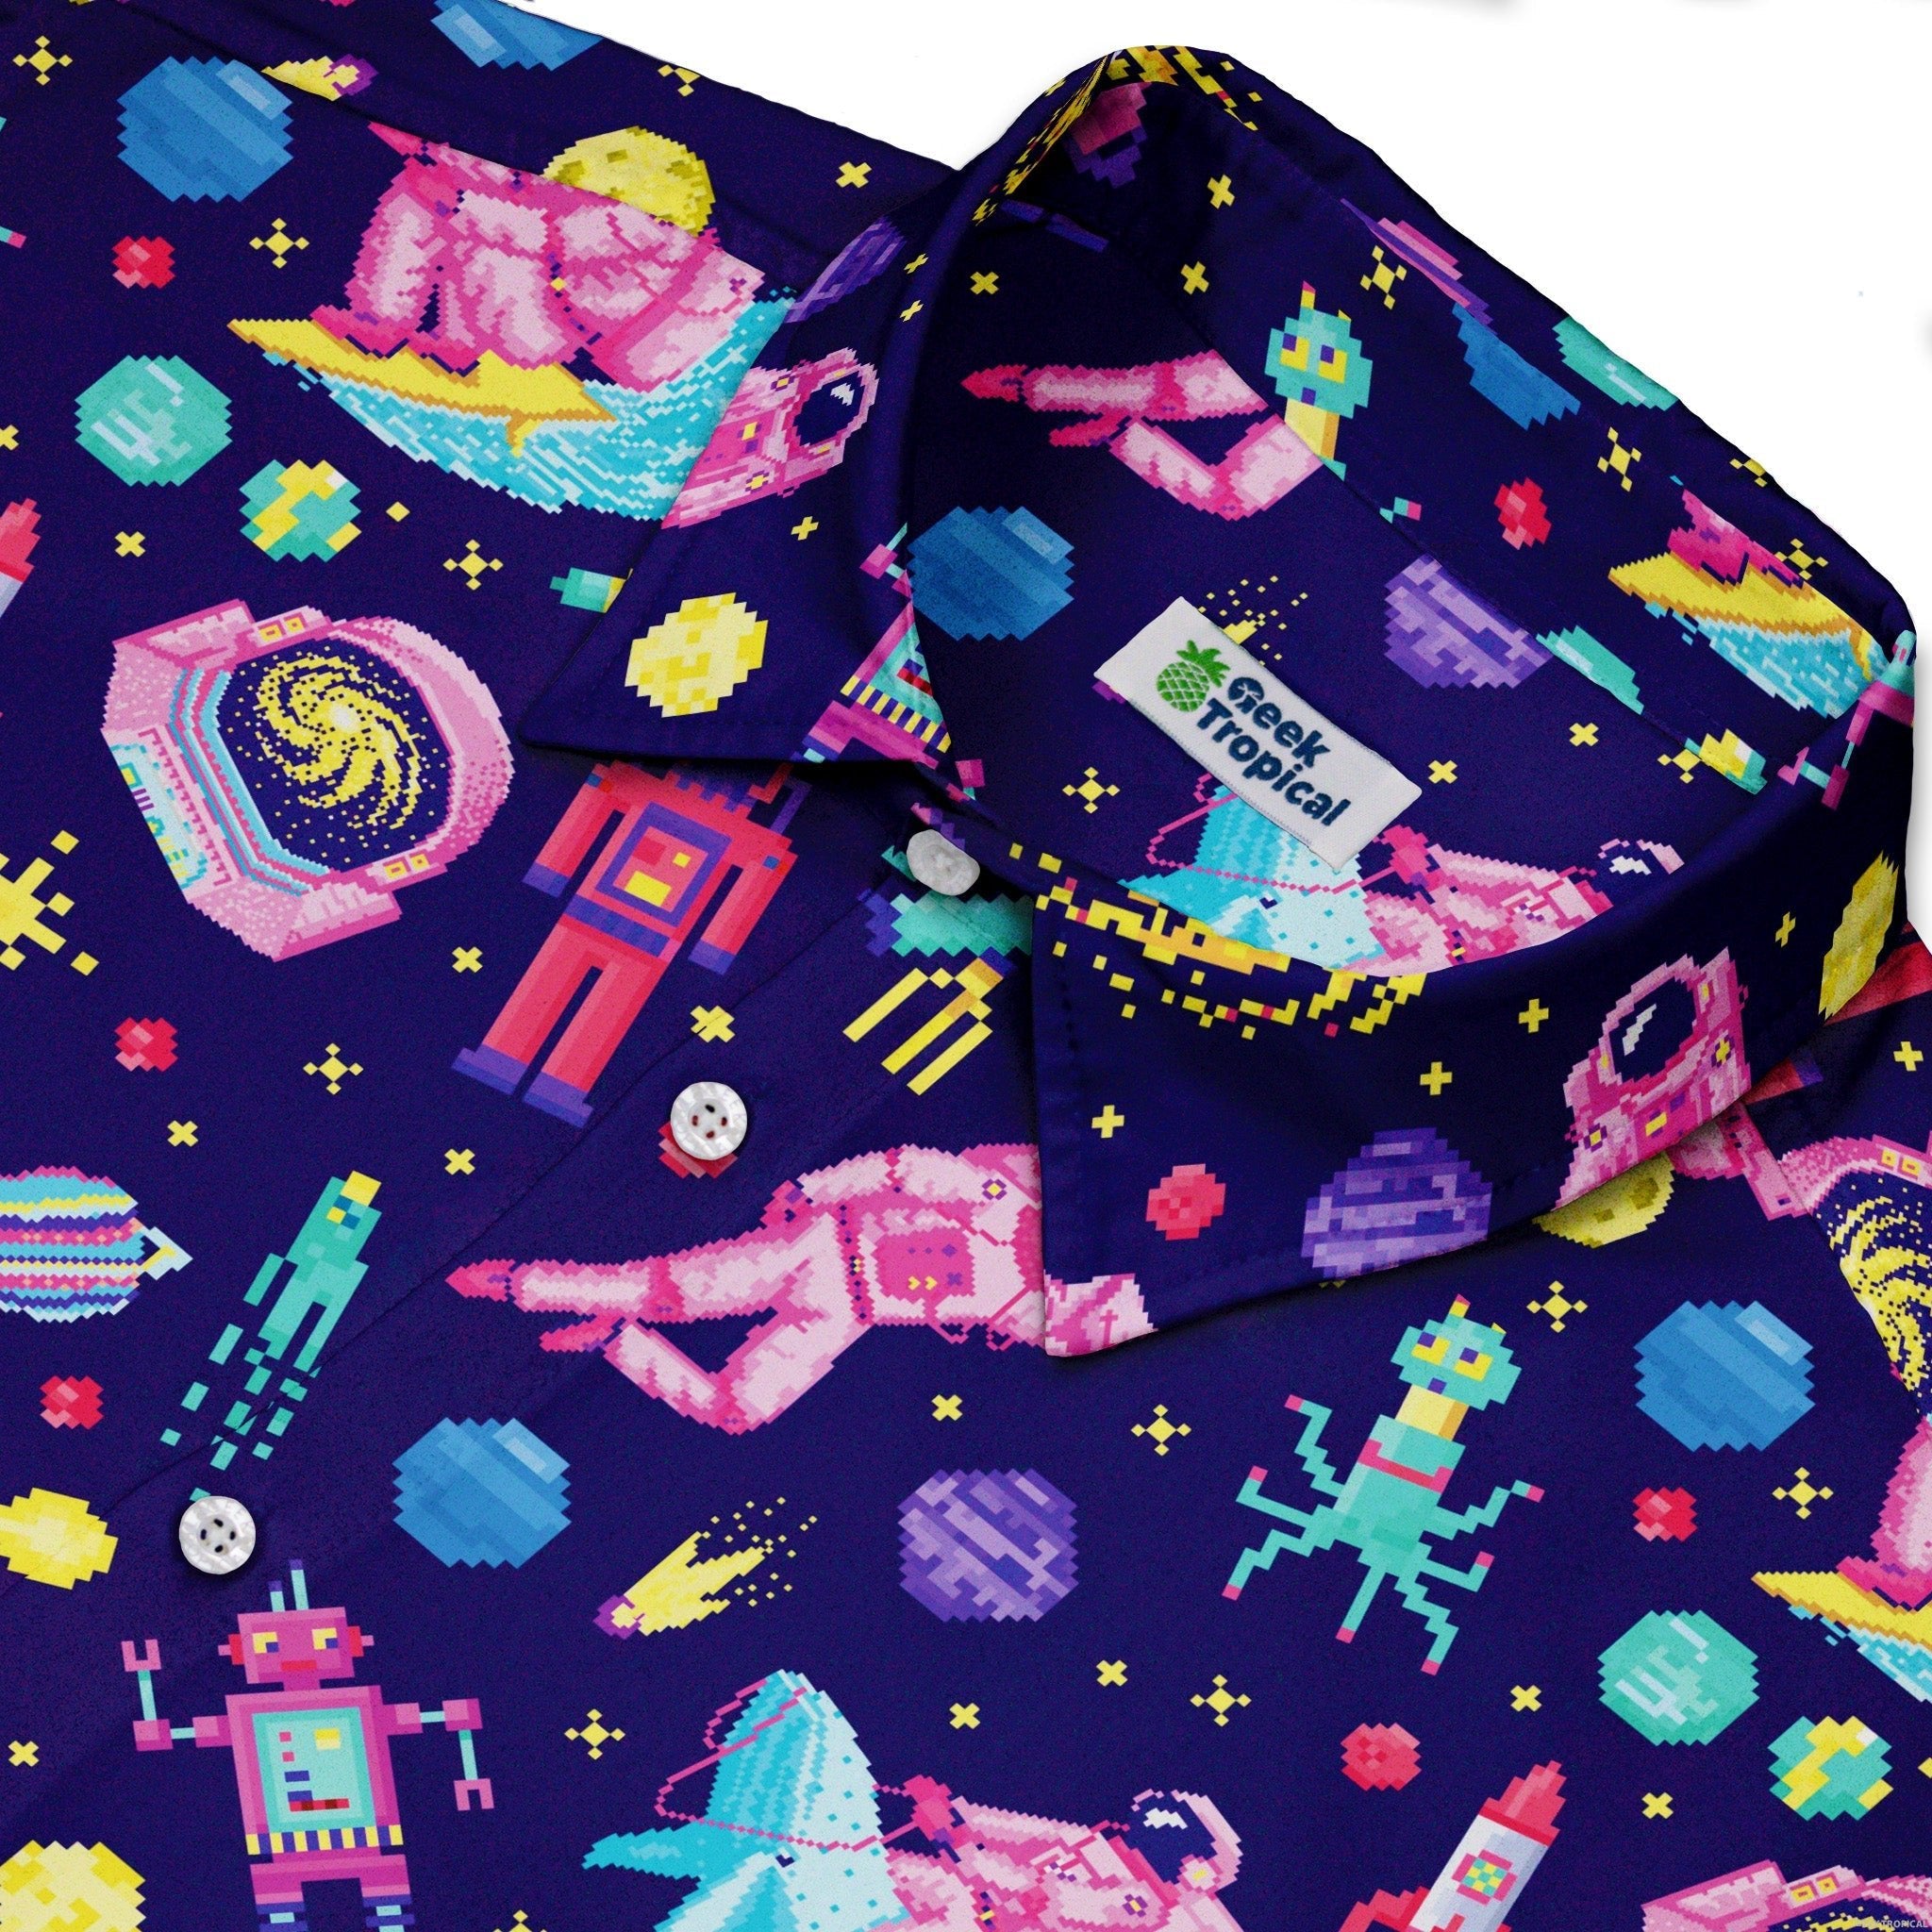 Astronaut Pixels Outer Space Purple Blue Button Up Shirt - adult sizing - Animal Patterns - Maximalist Patterns